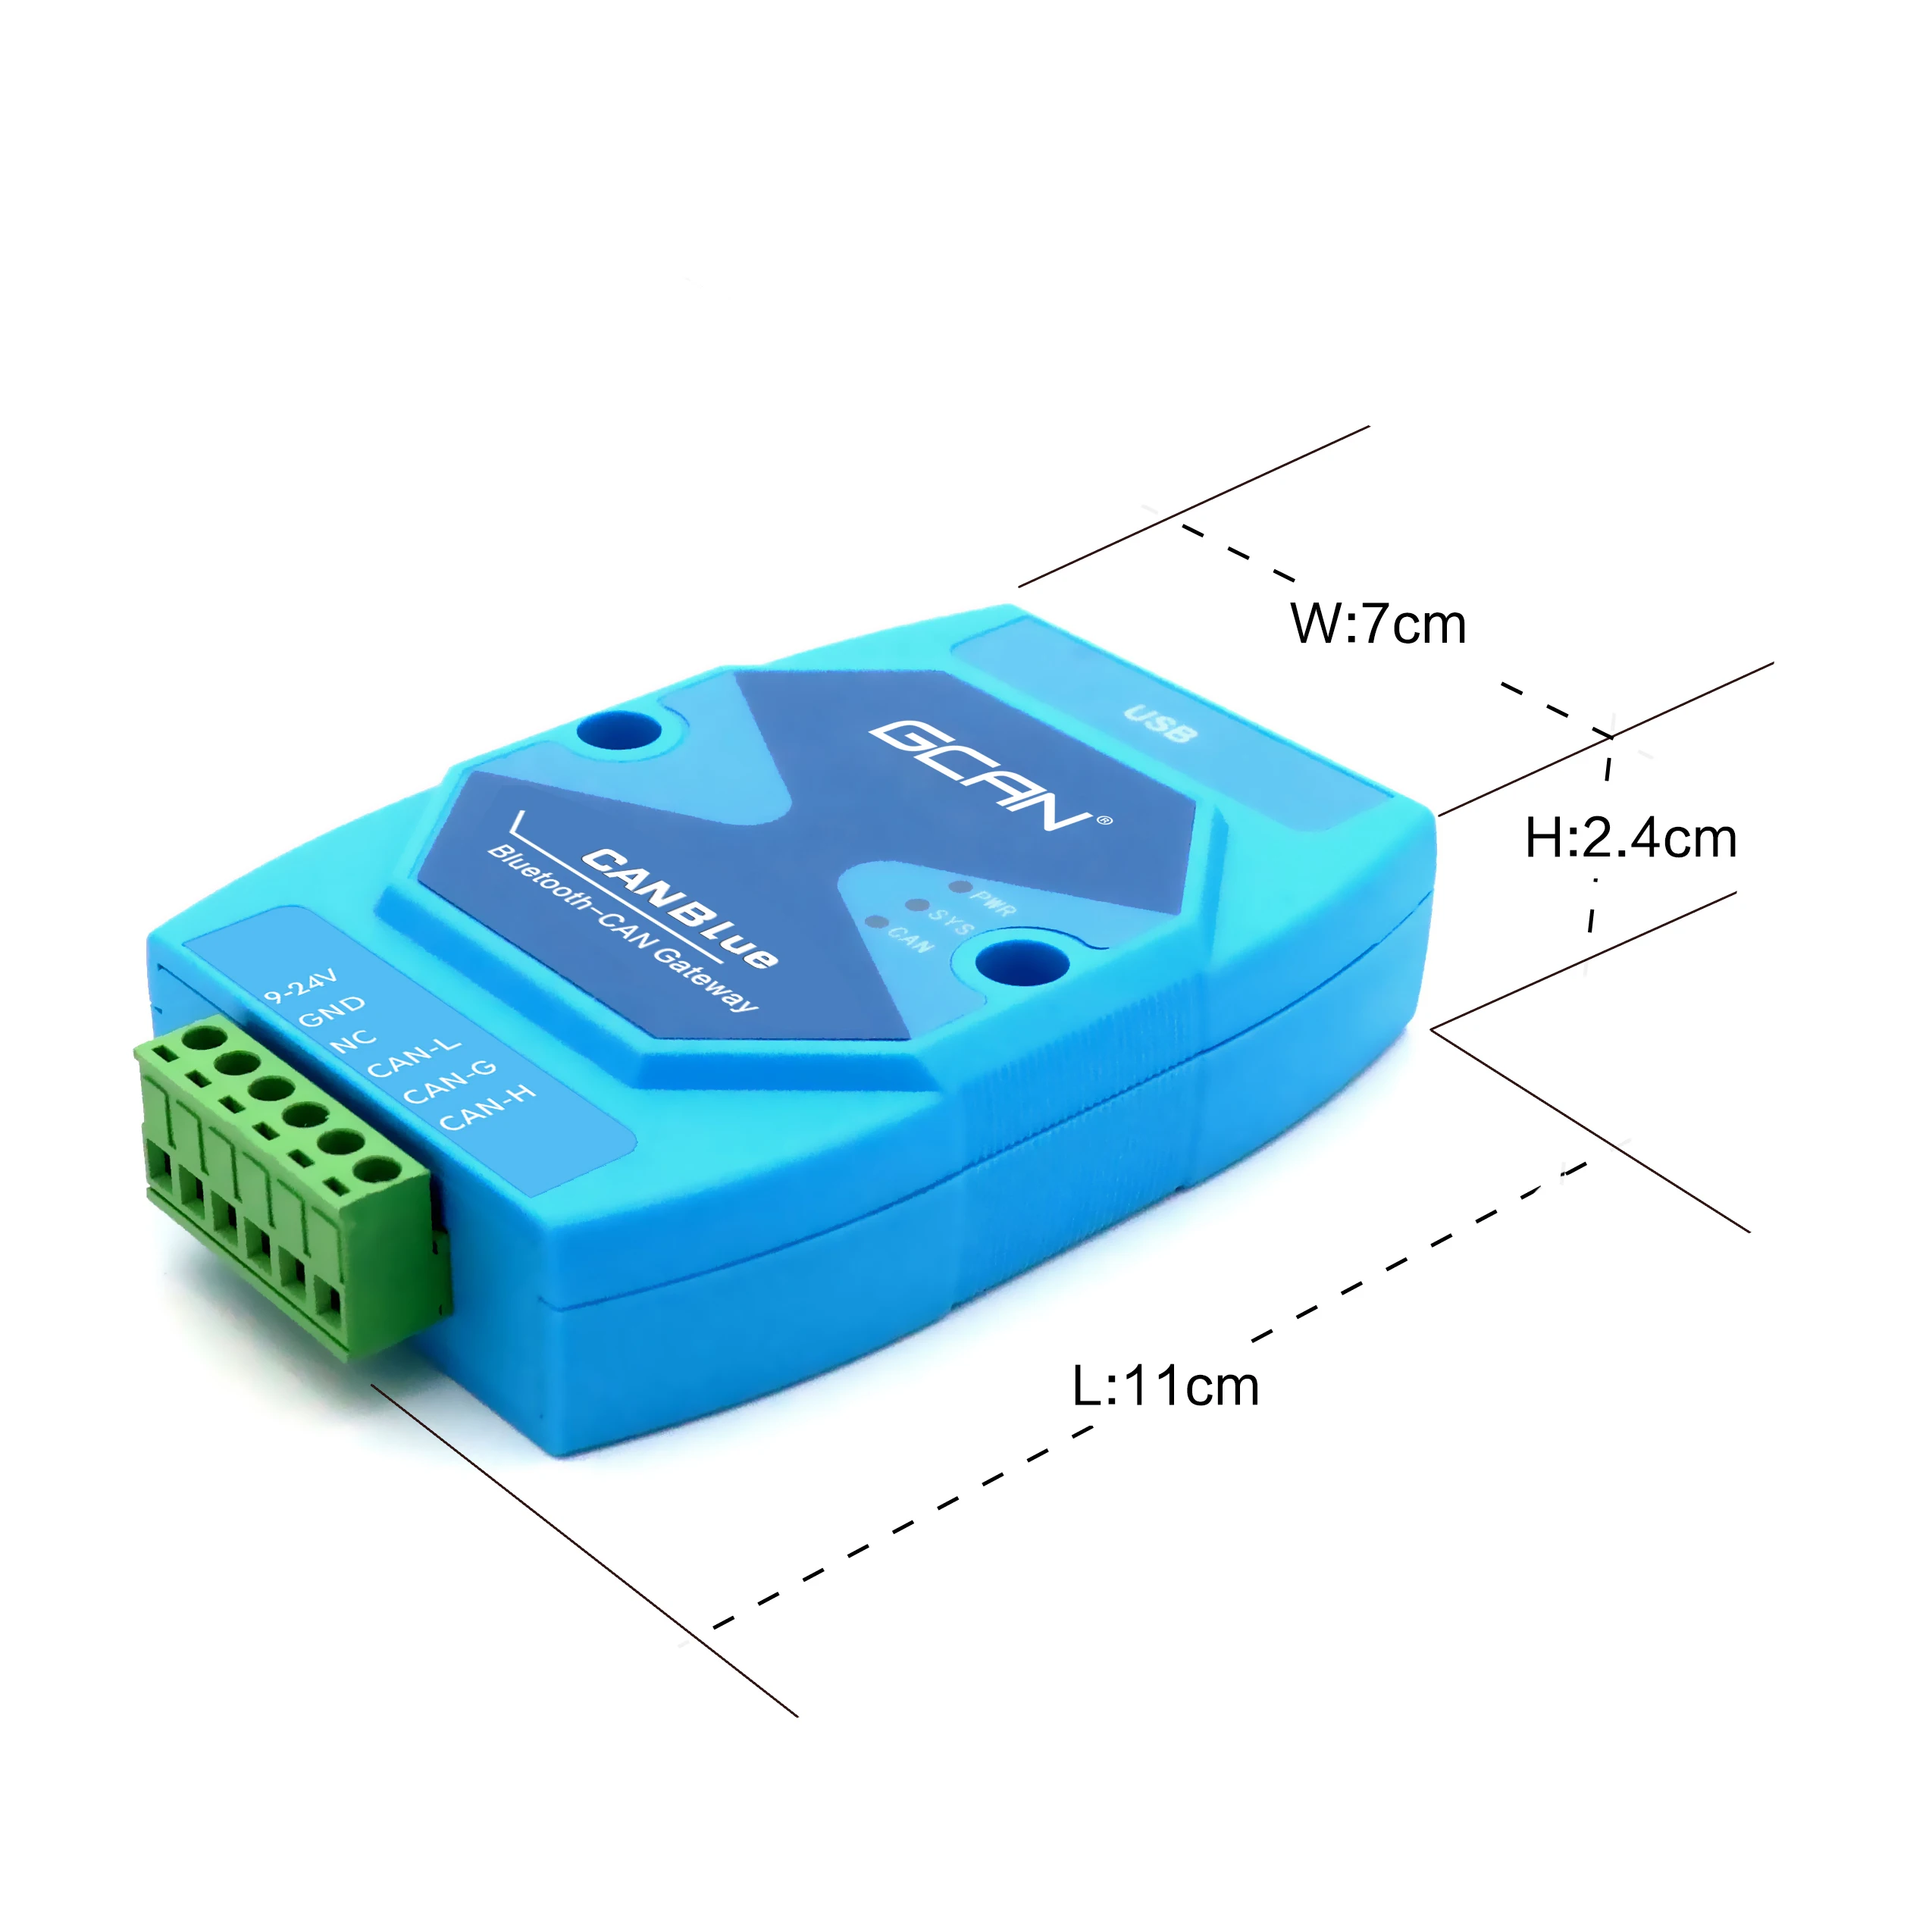 GCAN-203 Bluetooth to CAN Converter for Intelligent Control Of Medical Device Mobile APP